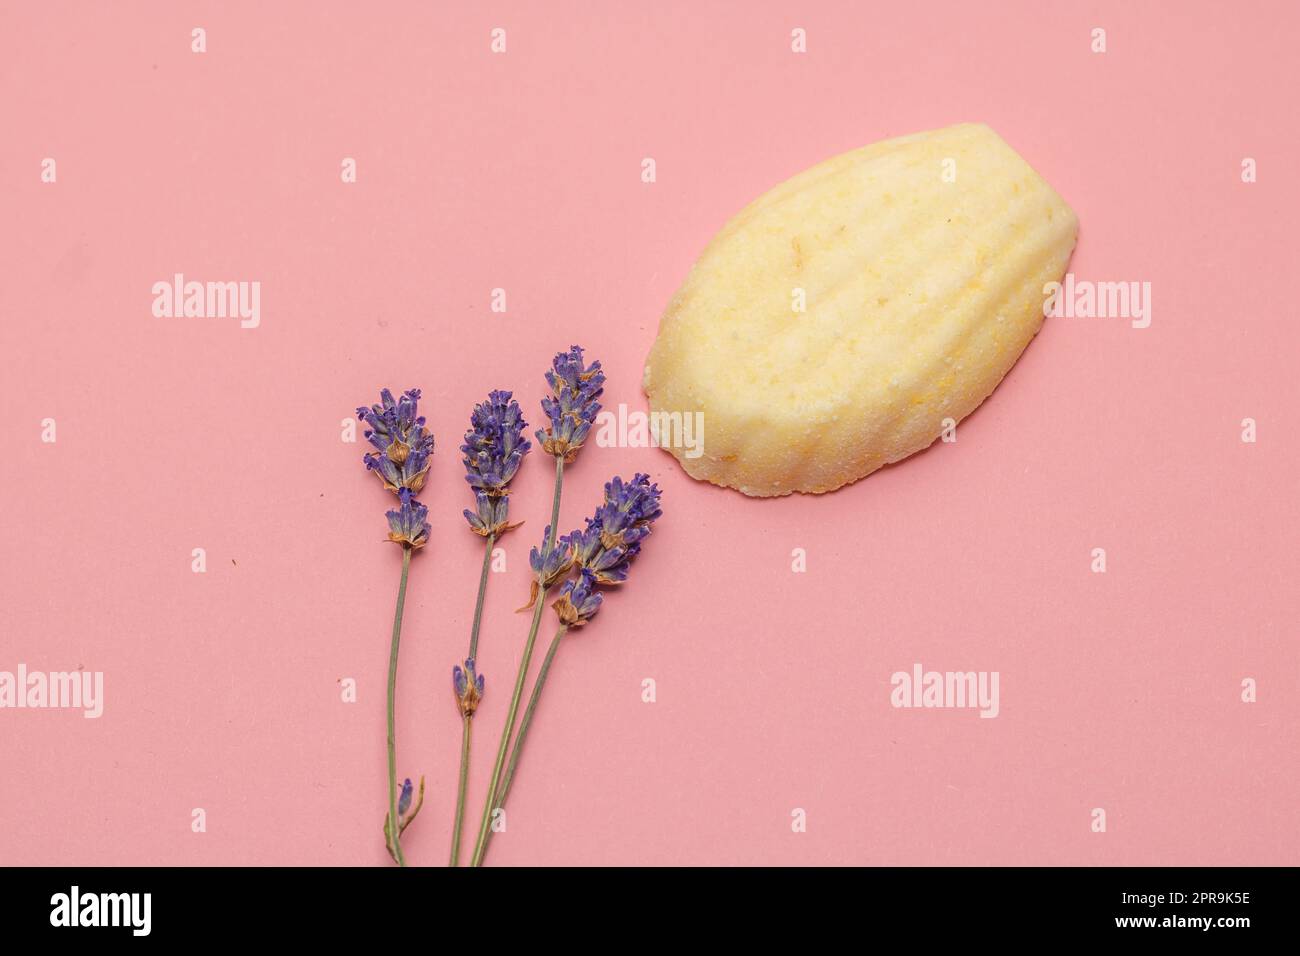 bath ball and lavender flowers Stock Photo